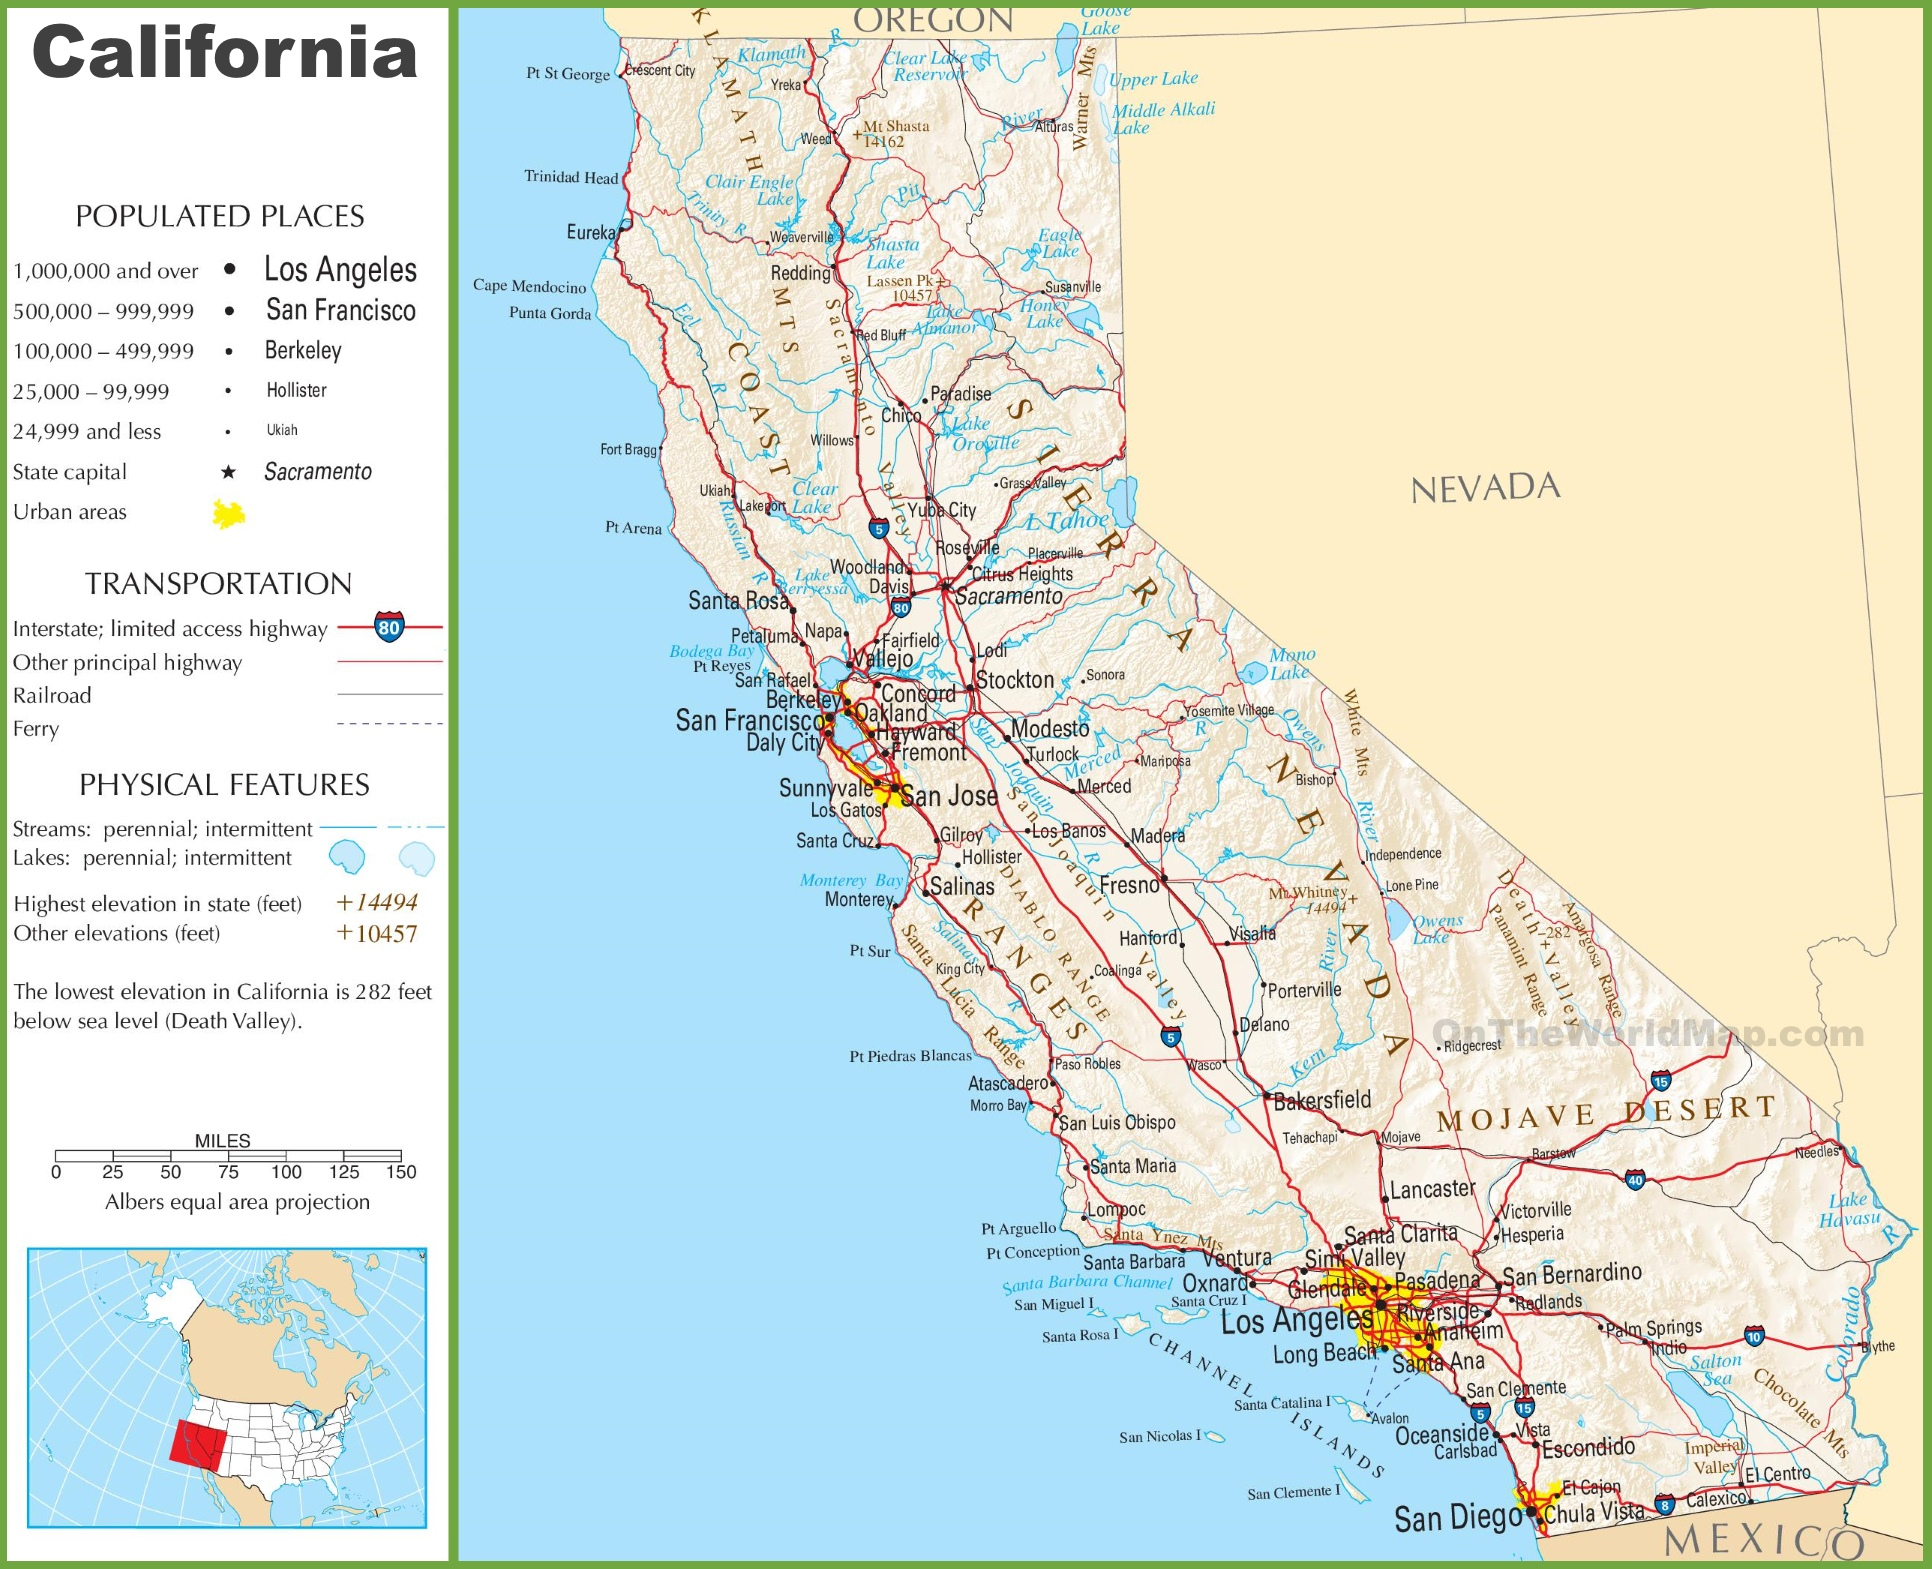 California Highway Map California Road Map Where Is Ontario - Where Can I Buy A Road Map Of California